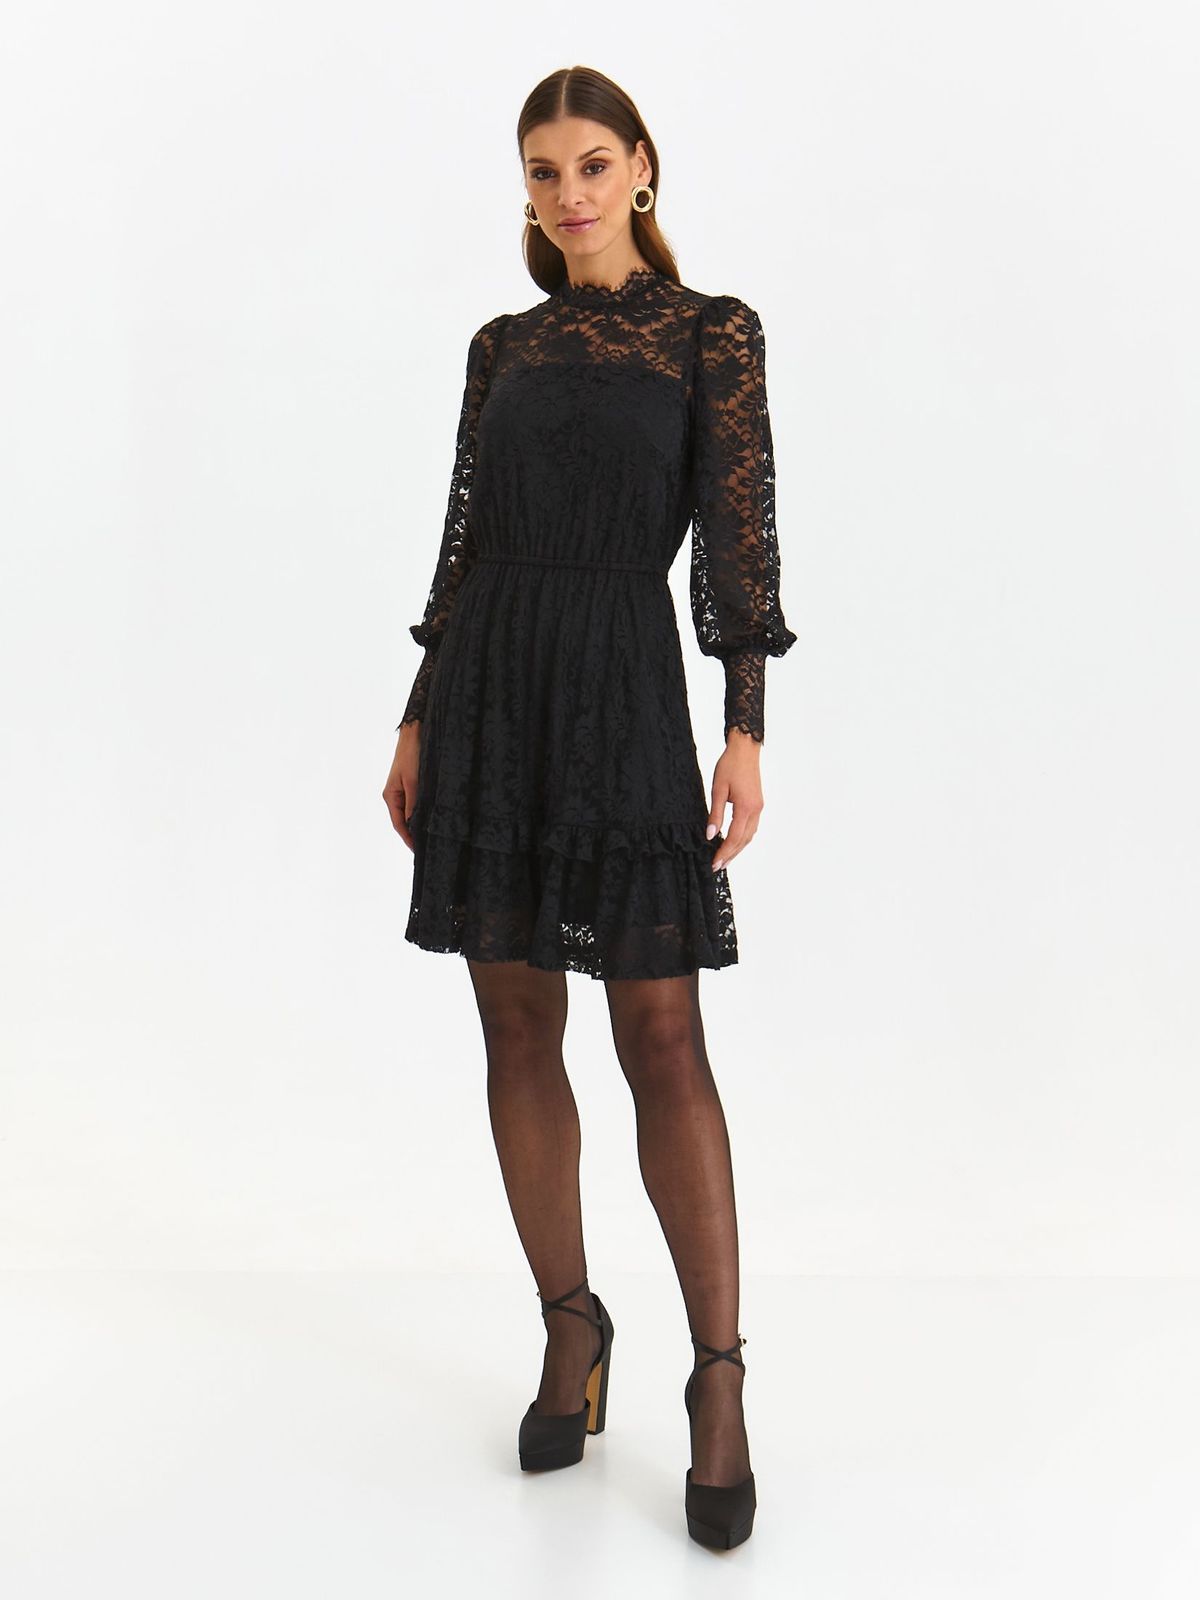 Black dress laced short cut cloche with elastic waist with puffed sleeves